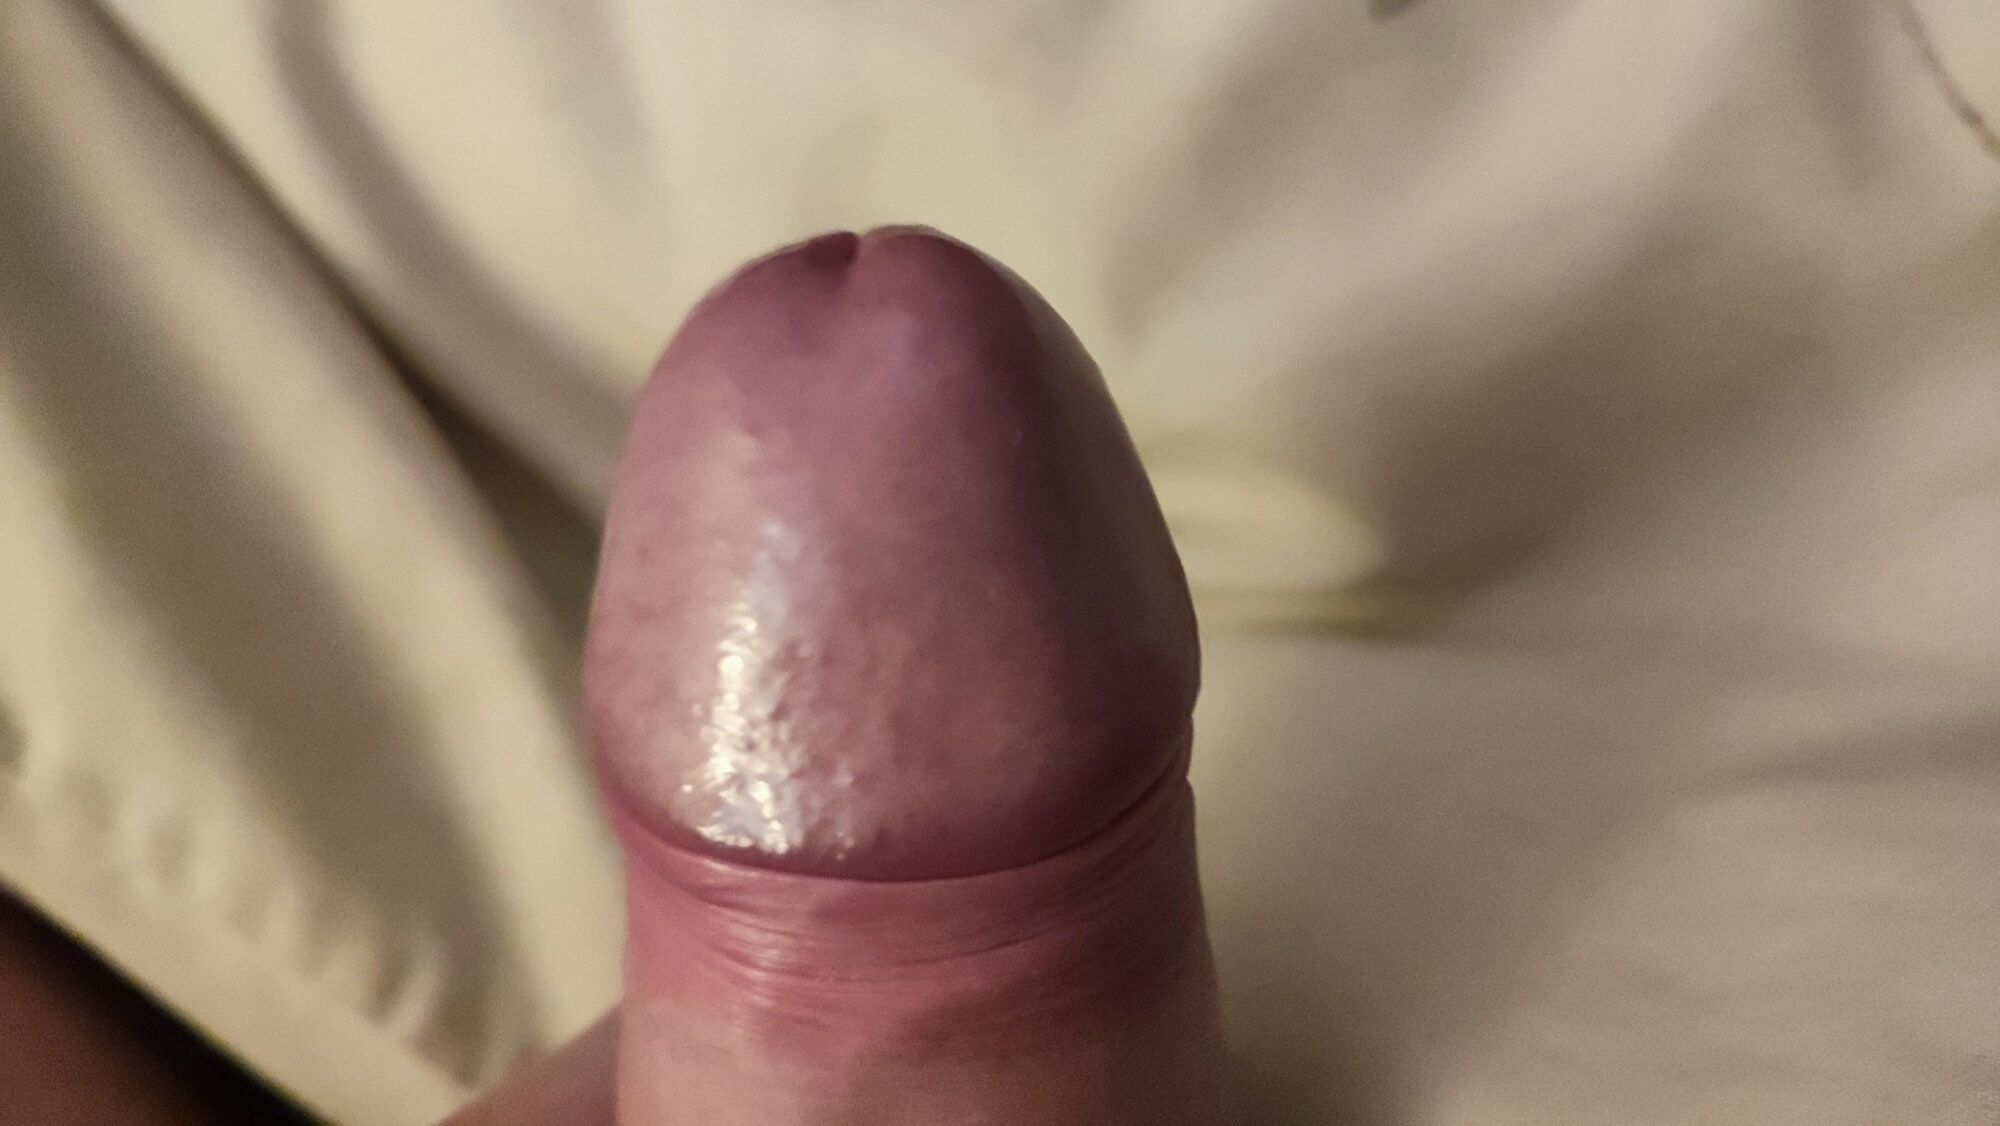 Lots of my cock #14